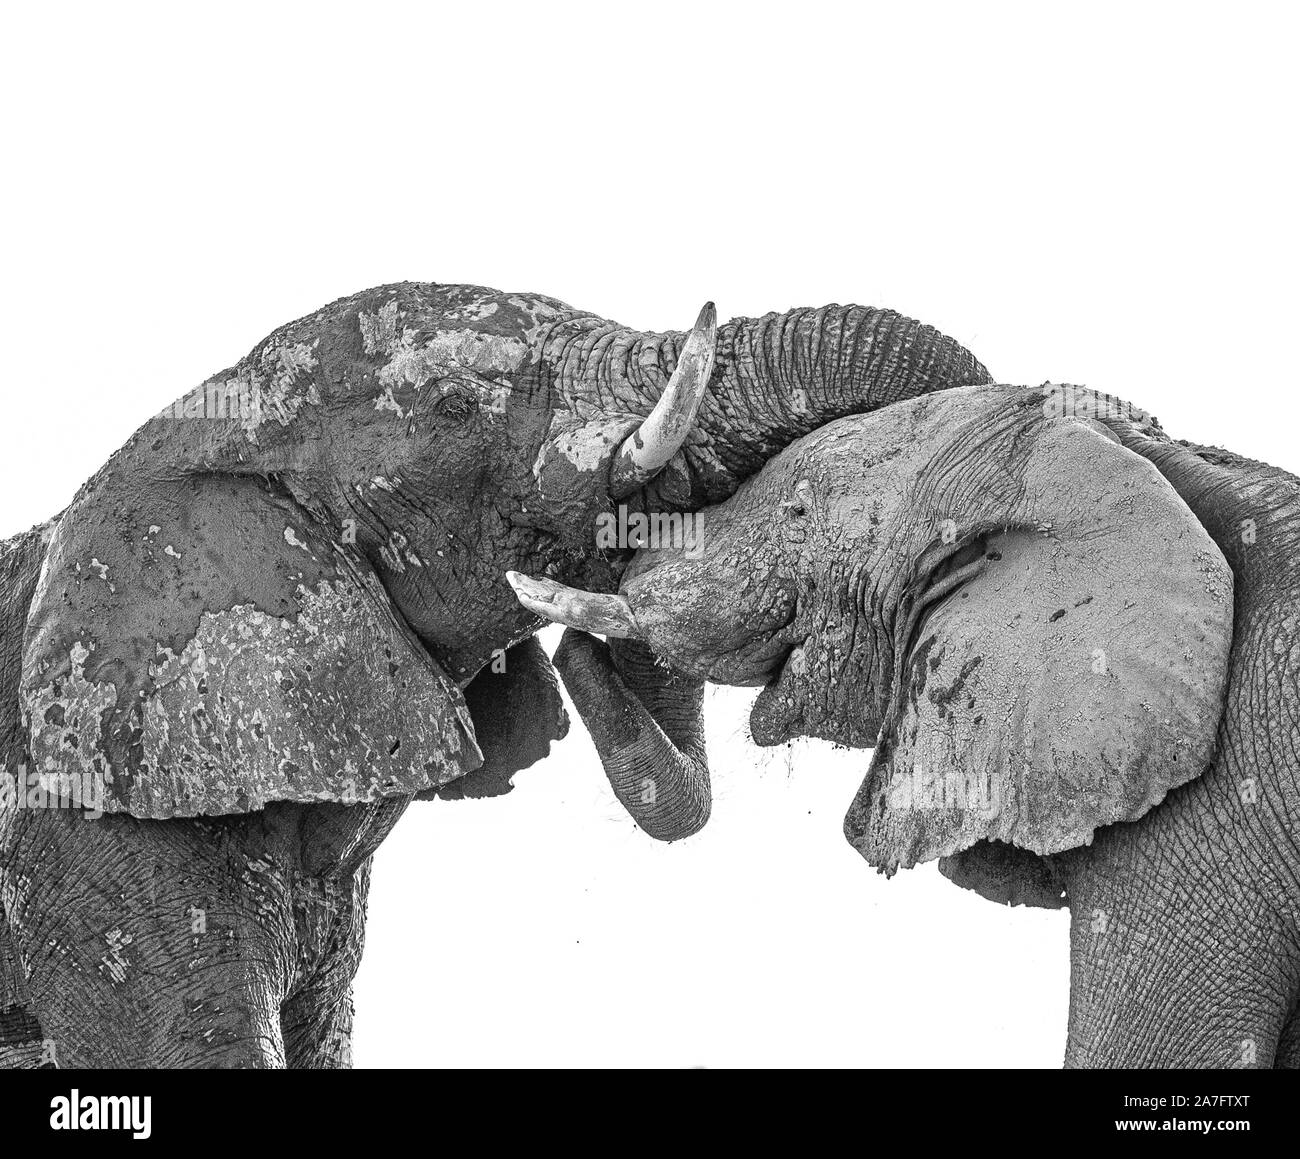 a black and white image of two elephants interacting with trunks entwined Stock Photo